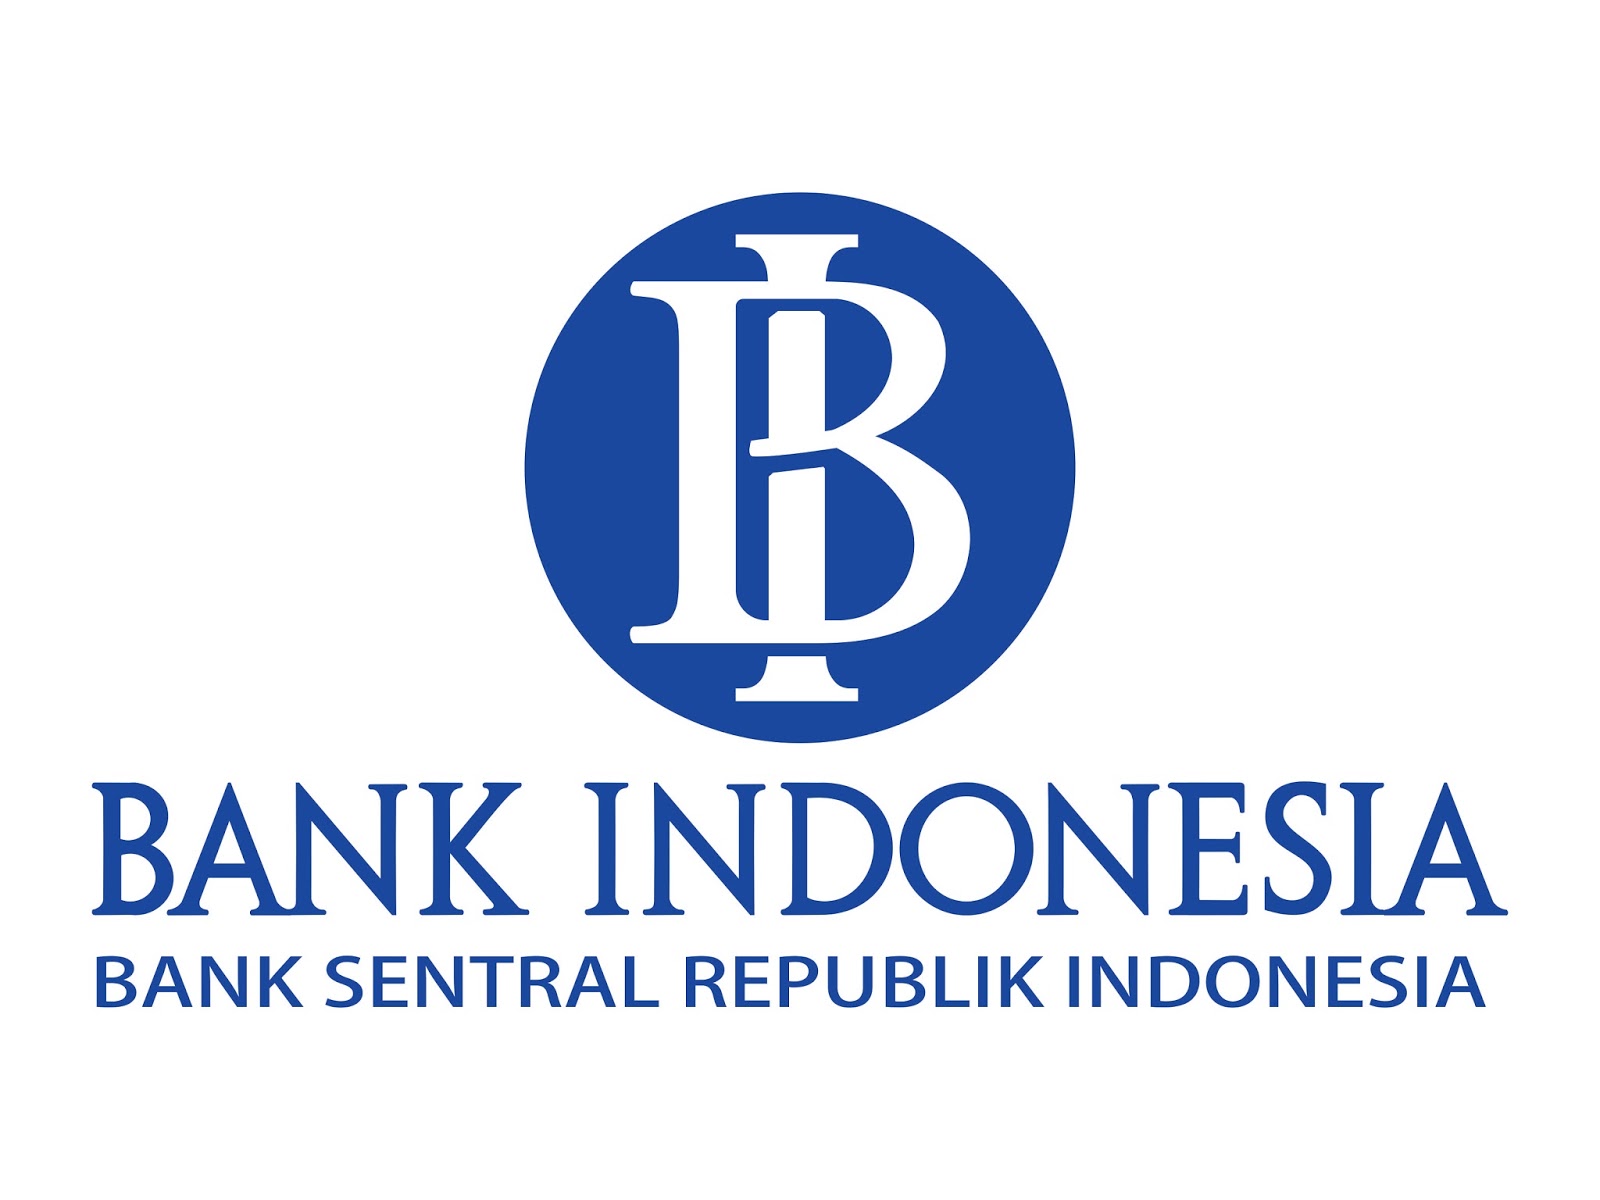 Indonesia's foreign debt drops to 406.3 bln USD as of May